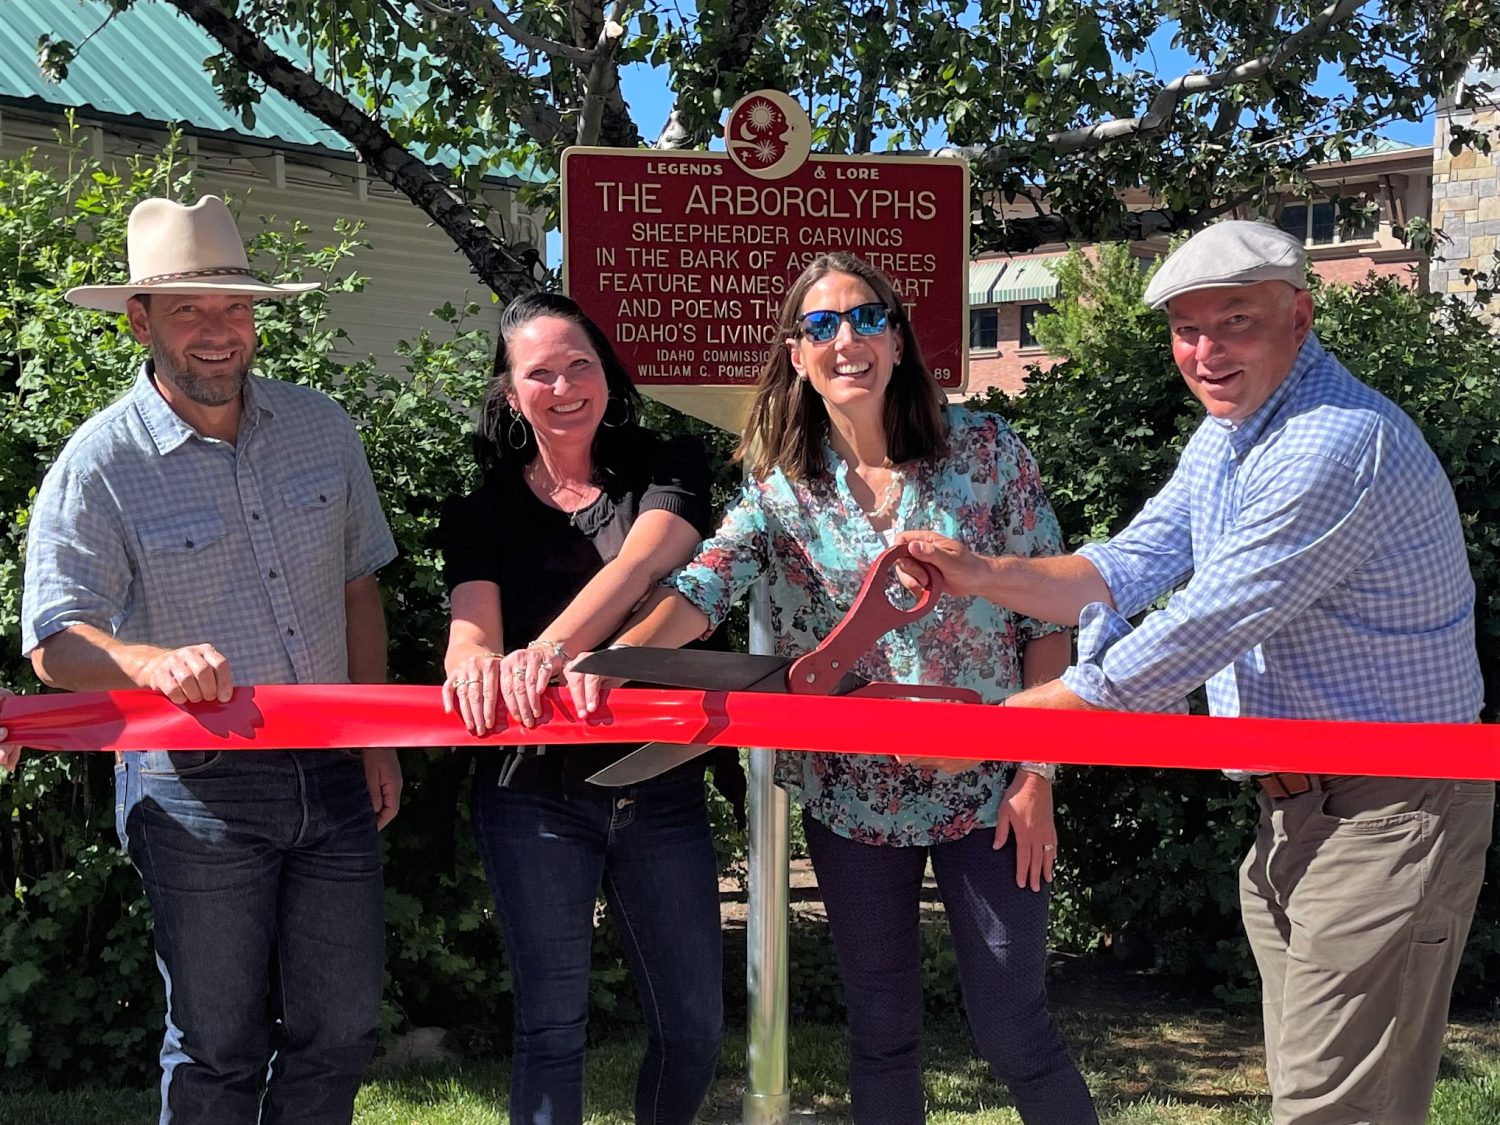 Three people hold a red ribbon while a fourth cuts it with large scissors. They stand in front of a maroon Legends and Lore roadside marker that reads "Legends & Lore / The Arborlyphs (all caps) / Sheepherder carvings in the bark of ... trees feature names ... and poems... Idaho" (some text obscured by people standing in front of the sign)